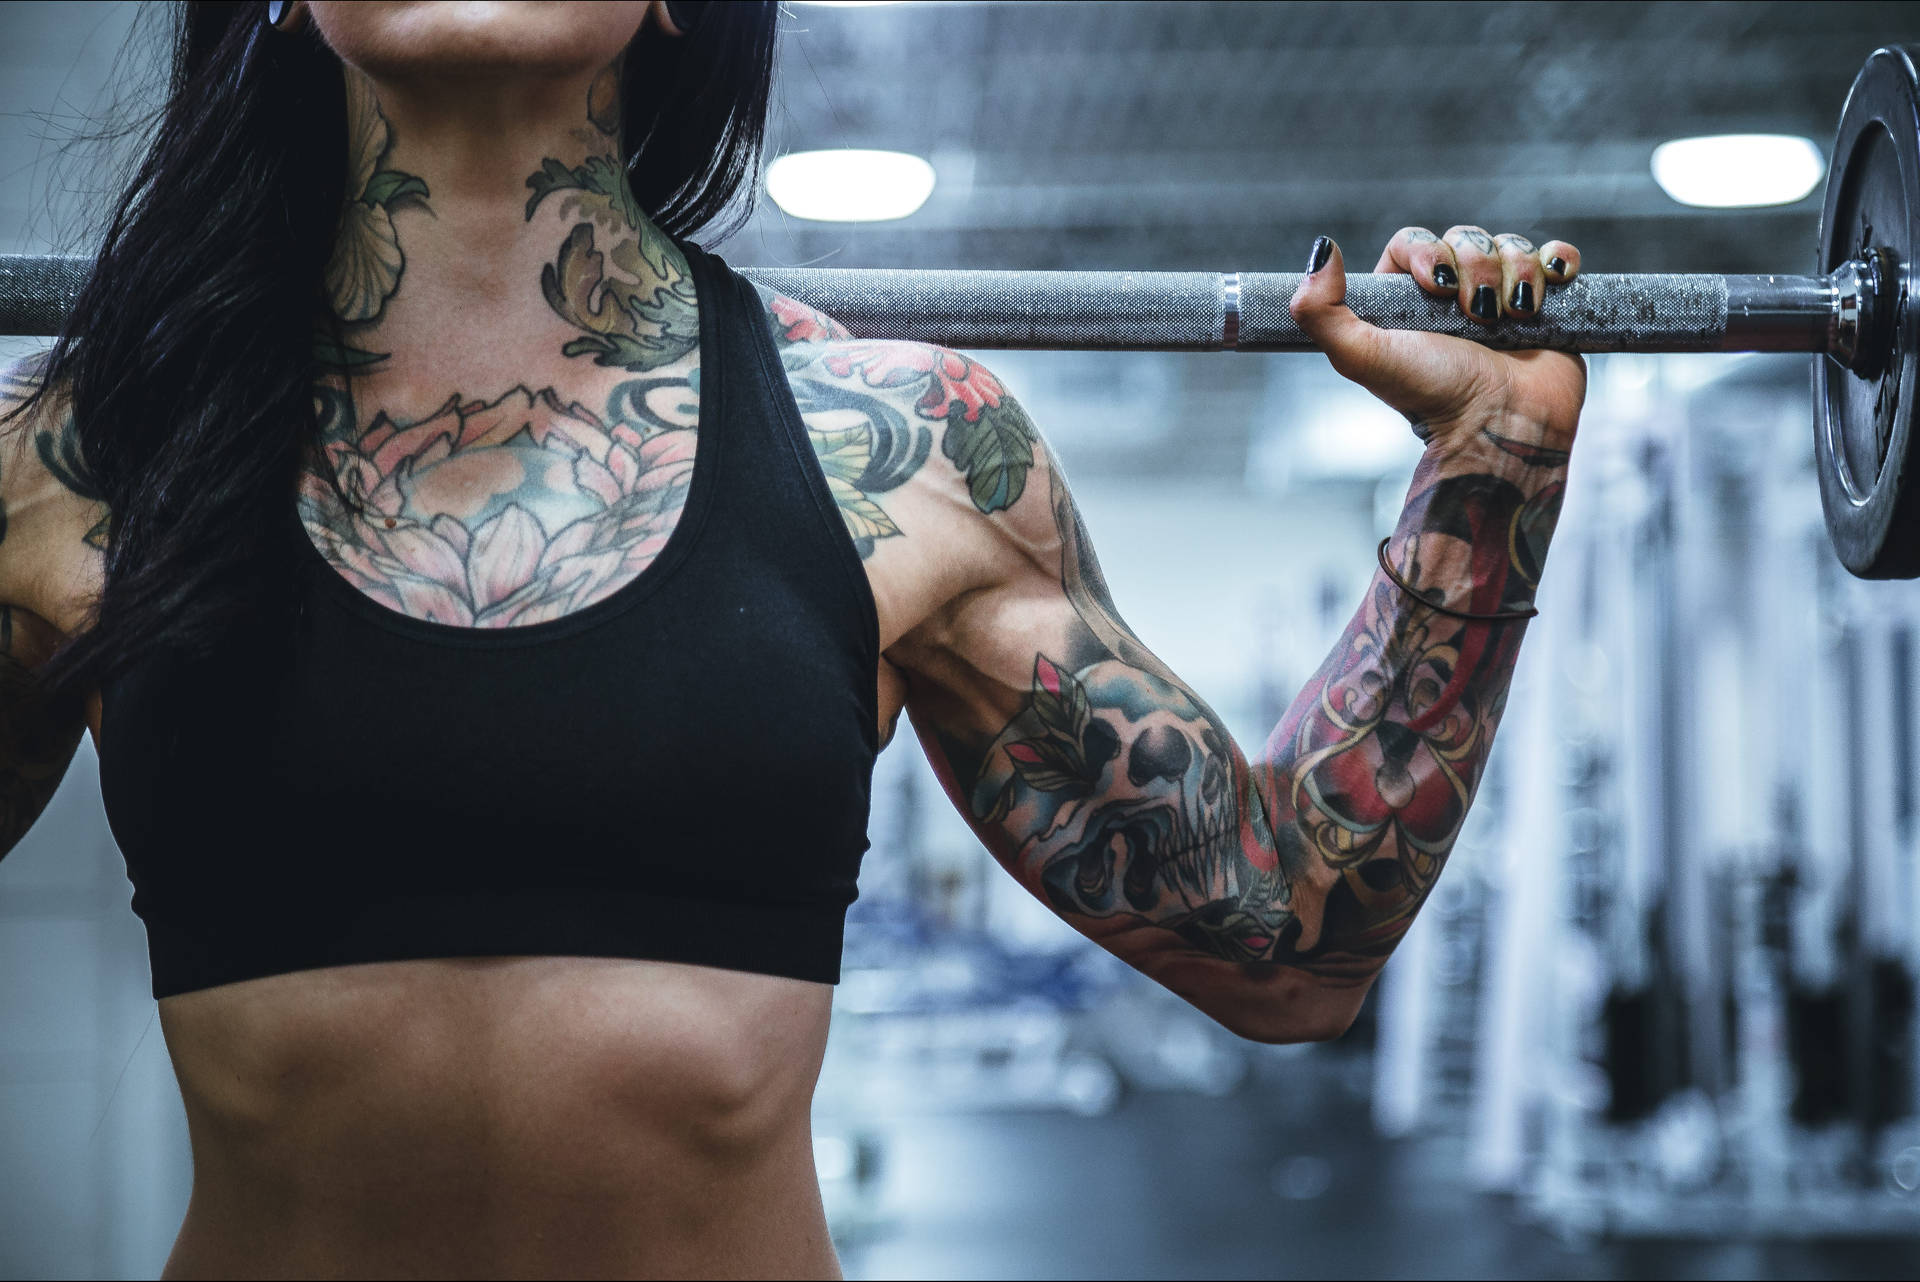 Tattooed Woman With Barbell Background